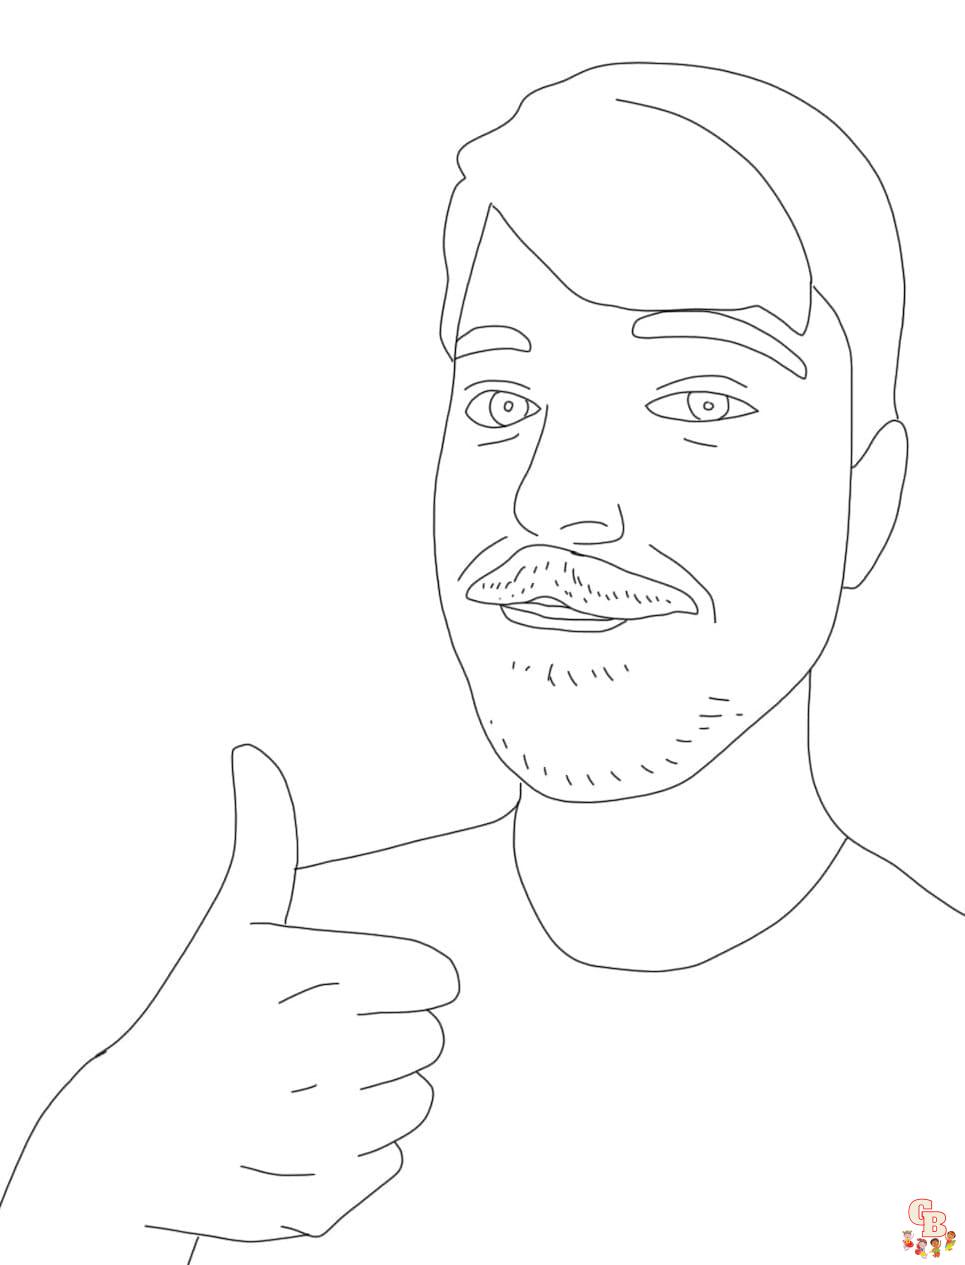 MrBeast coloring pages free